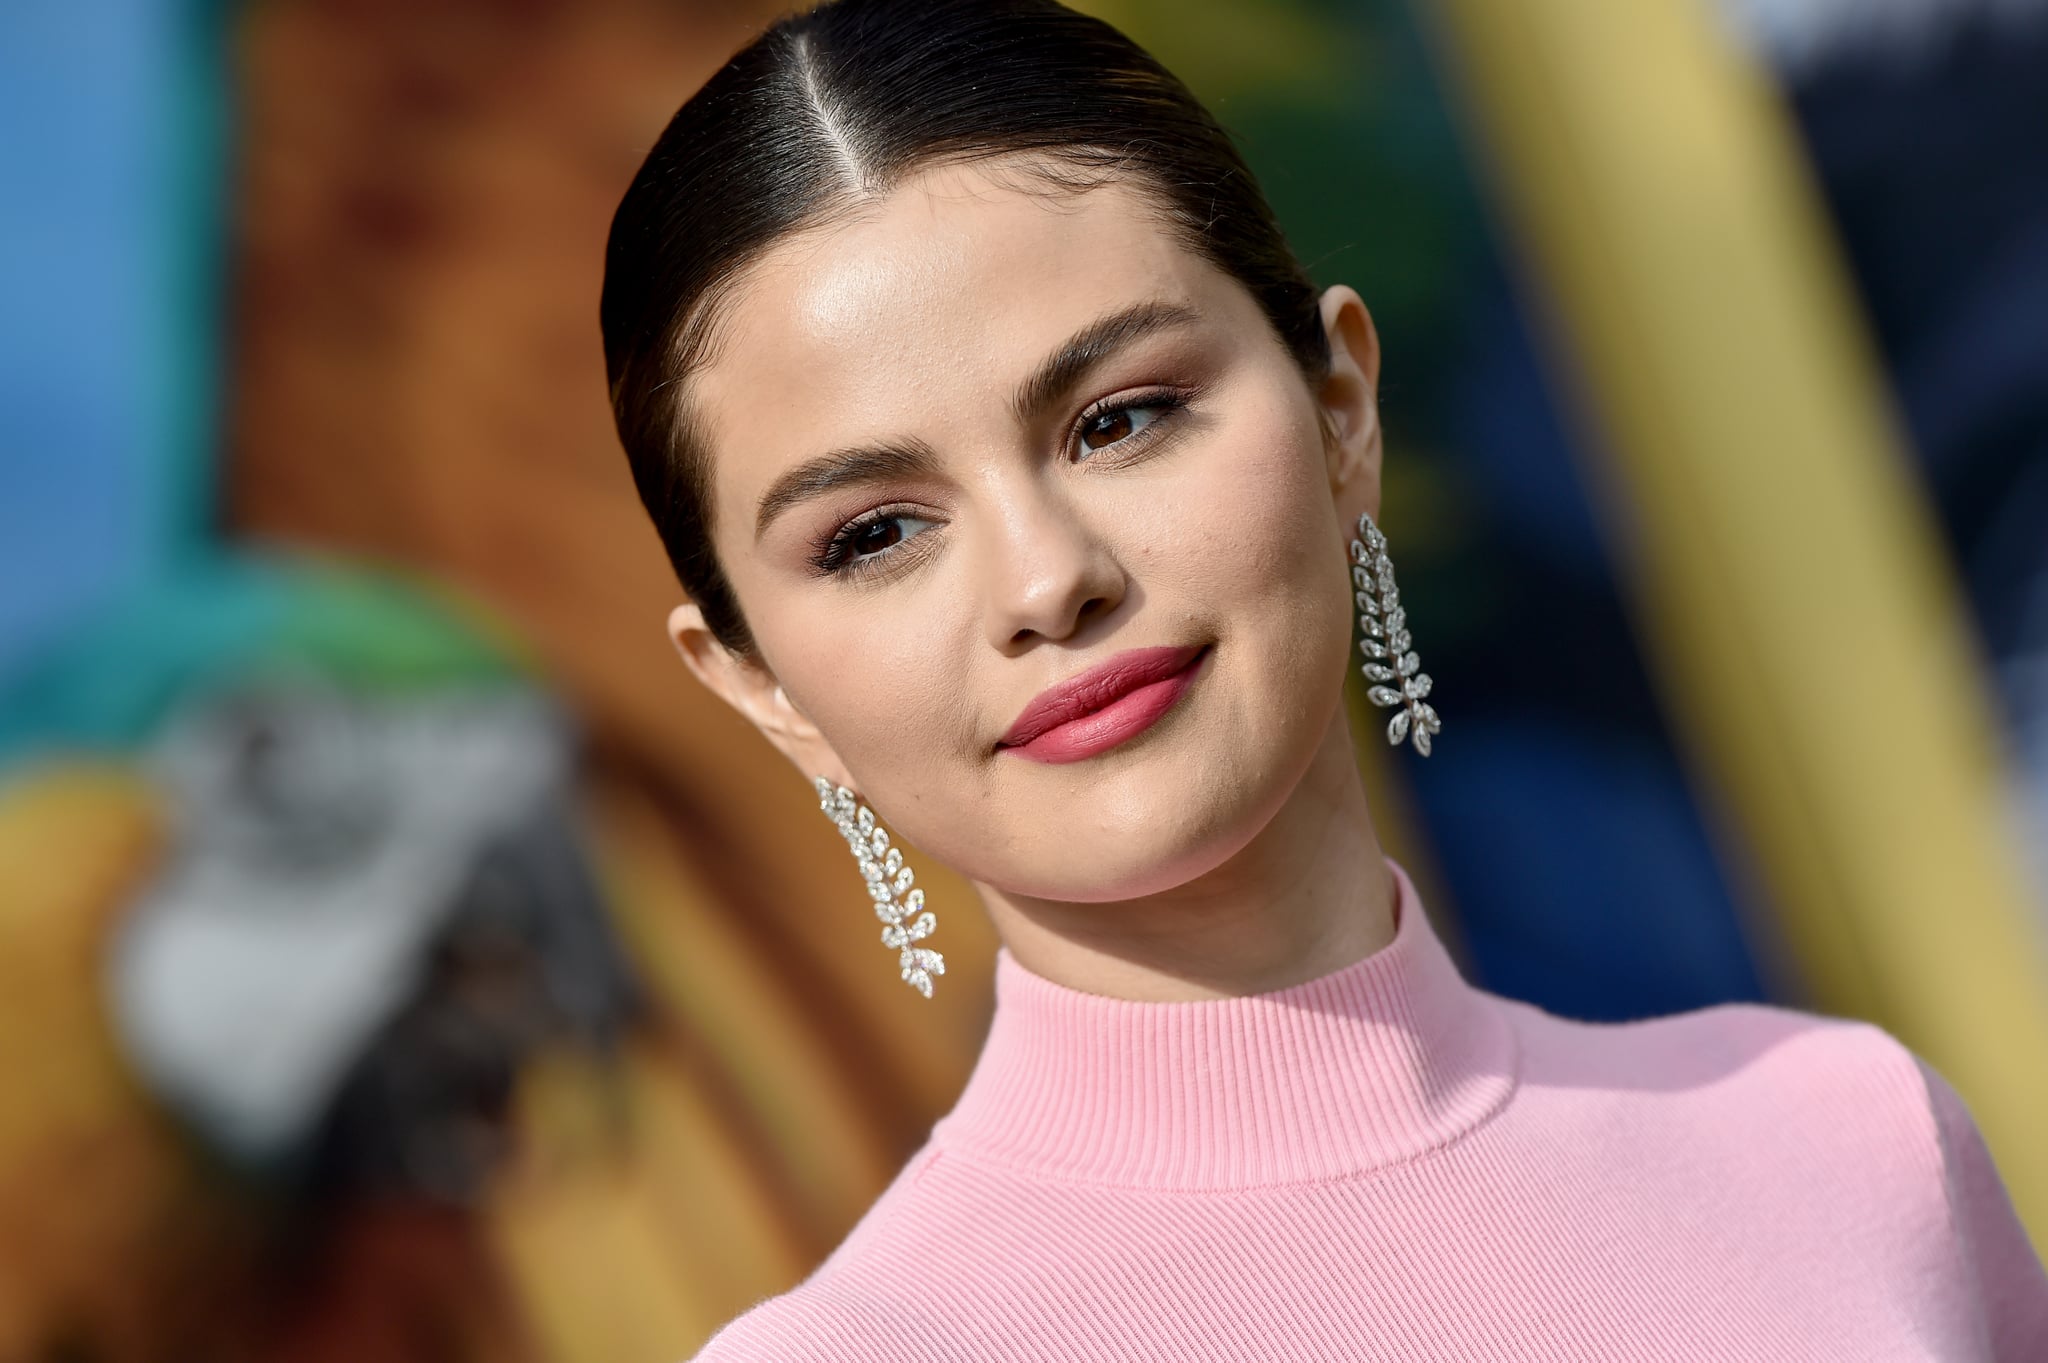 WESTWOOD, CALIFORNIA - JANUARY 11: Selena Gomez attends the premiere of Universal Pictures